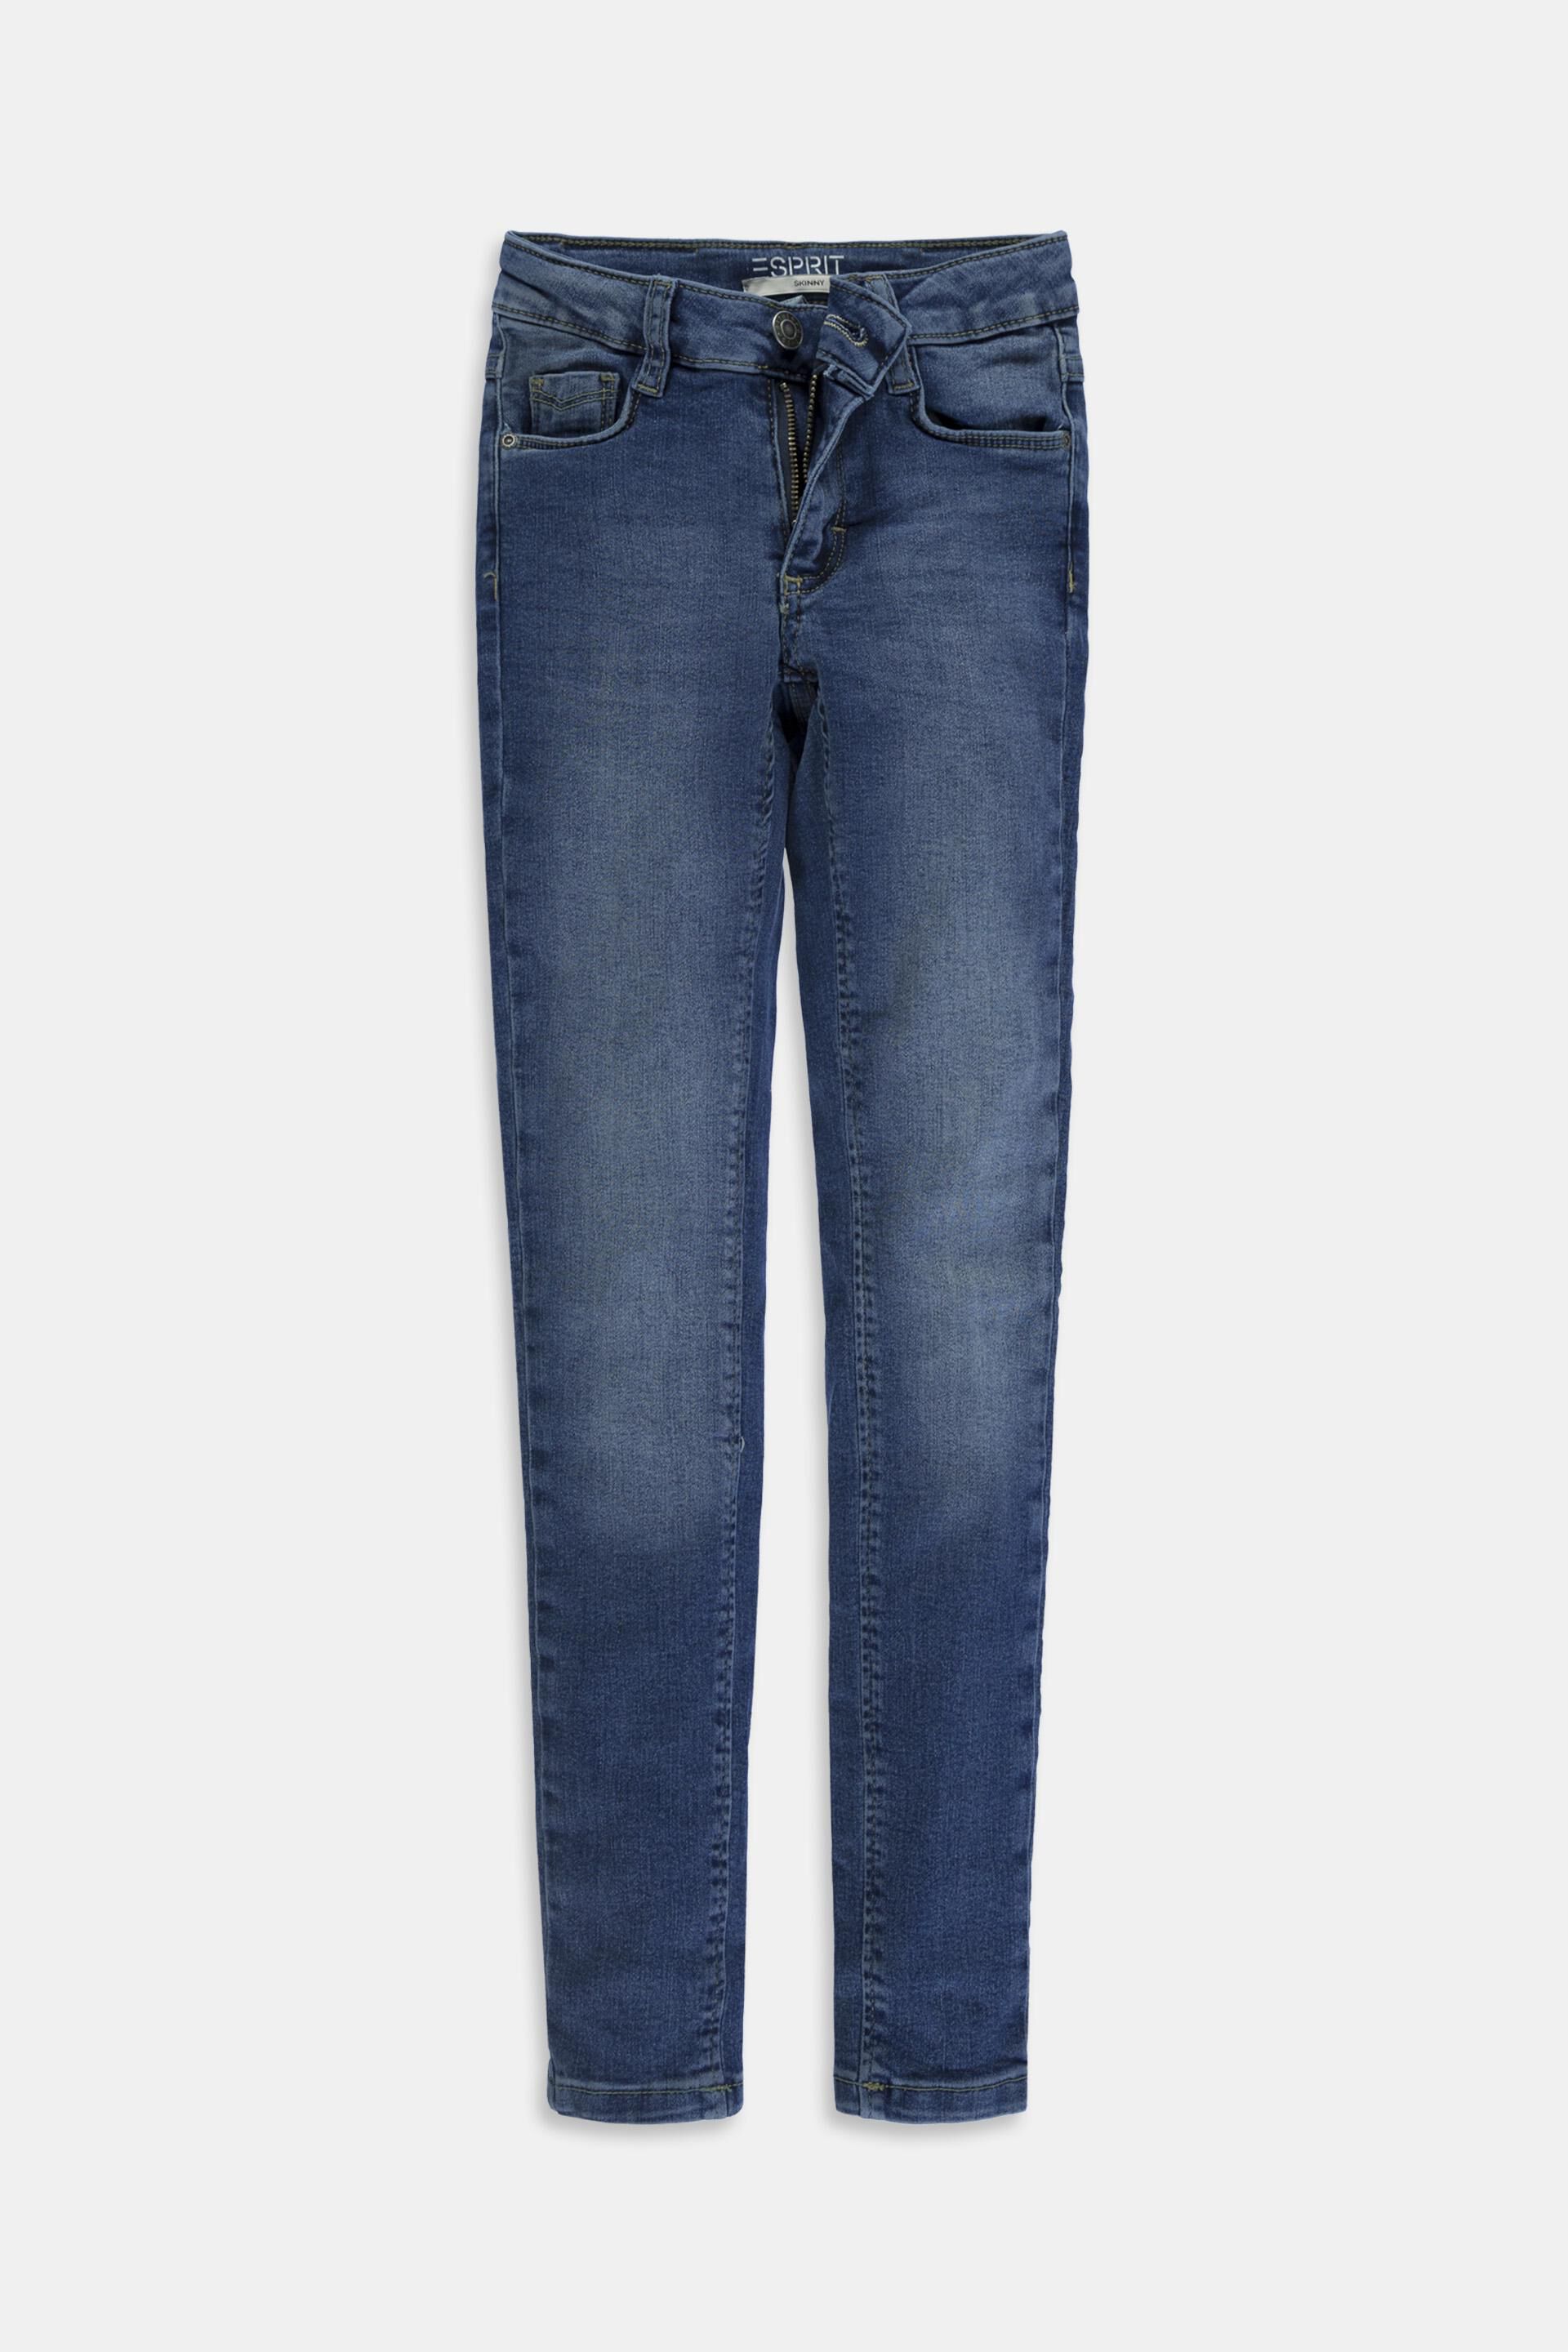 Esprit different available in adjustable with an Stretch widths jeans waistband